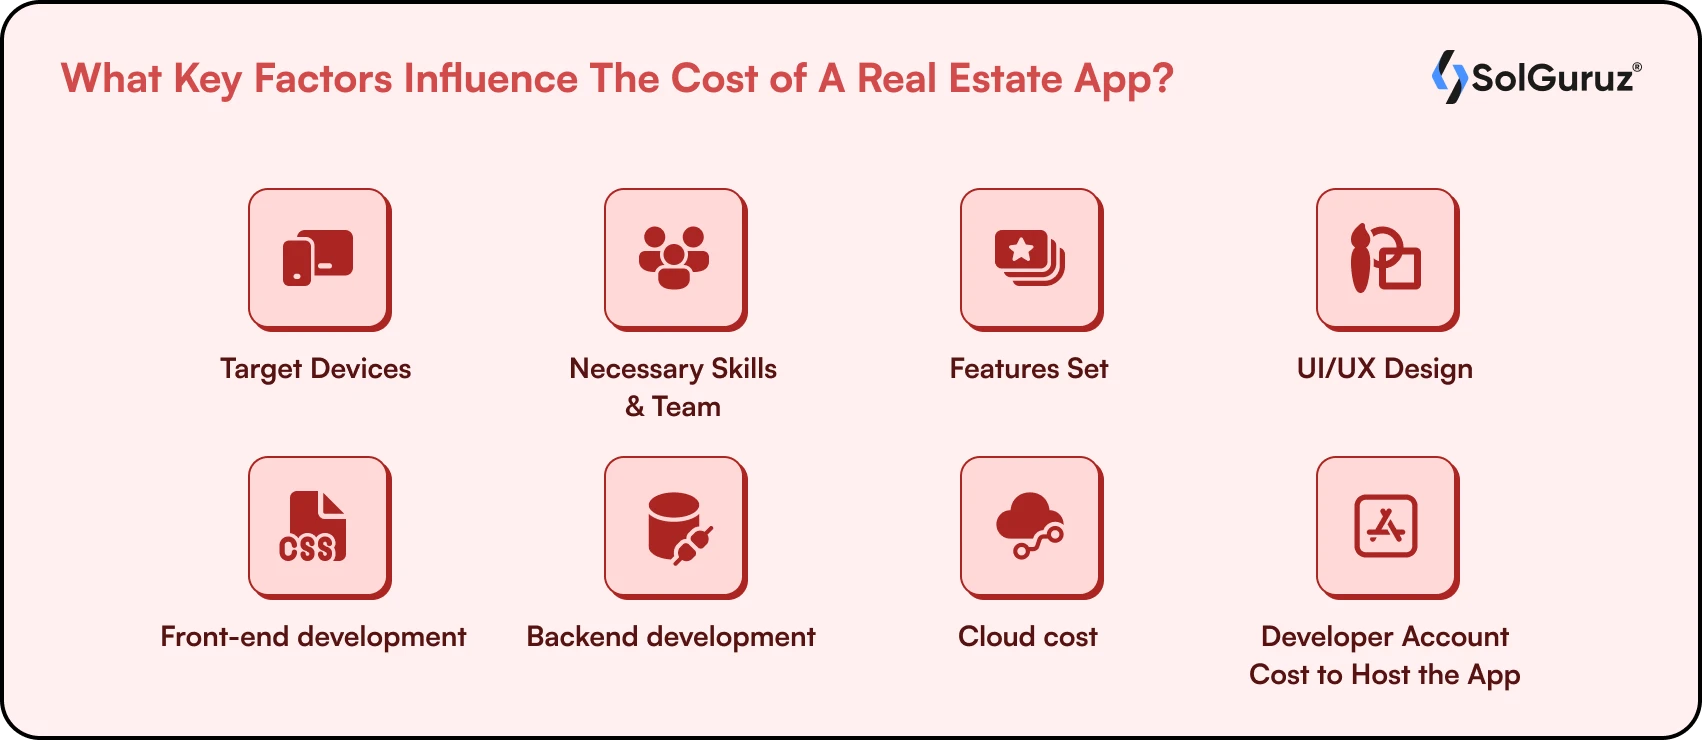 What Key Factors Influence The Cost of A Real Estate App